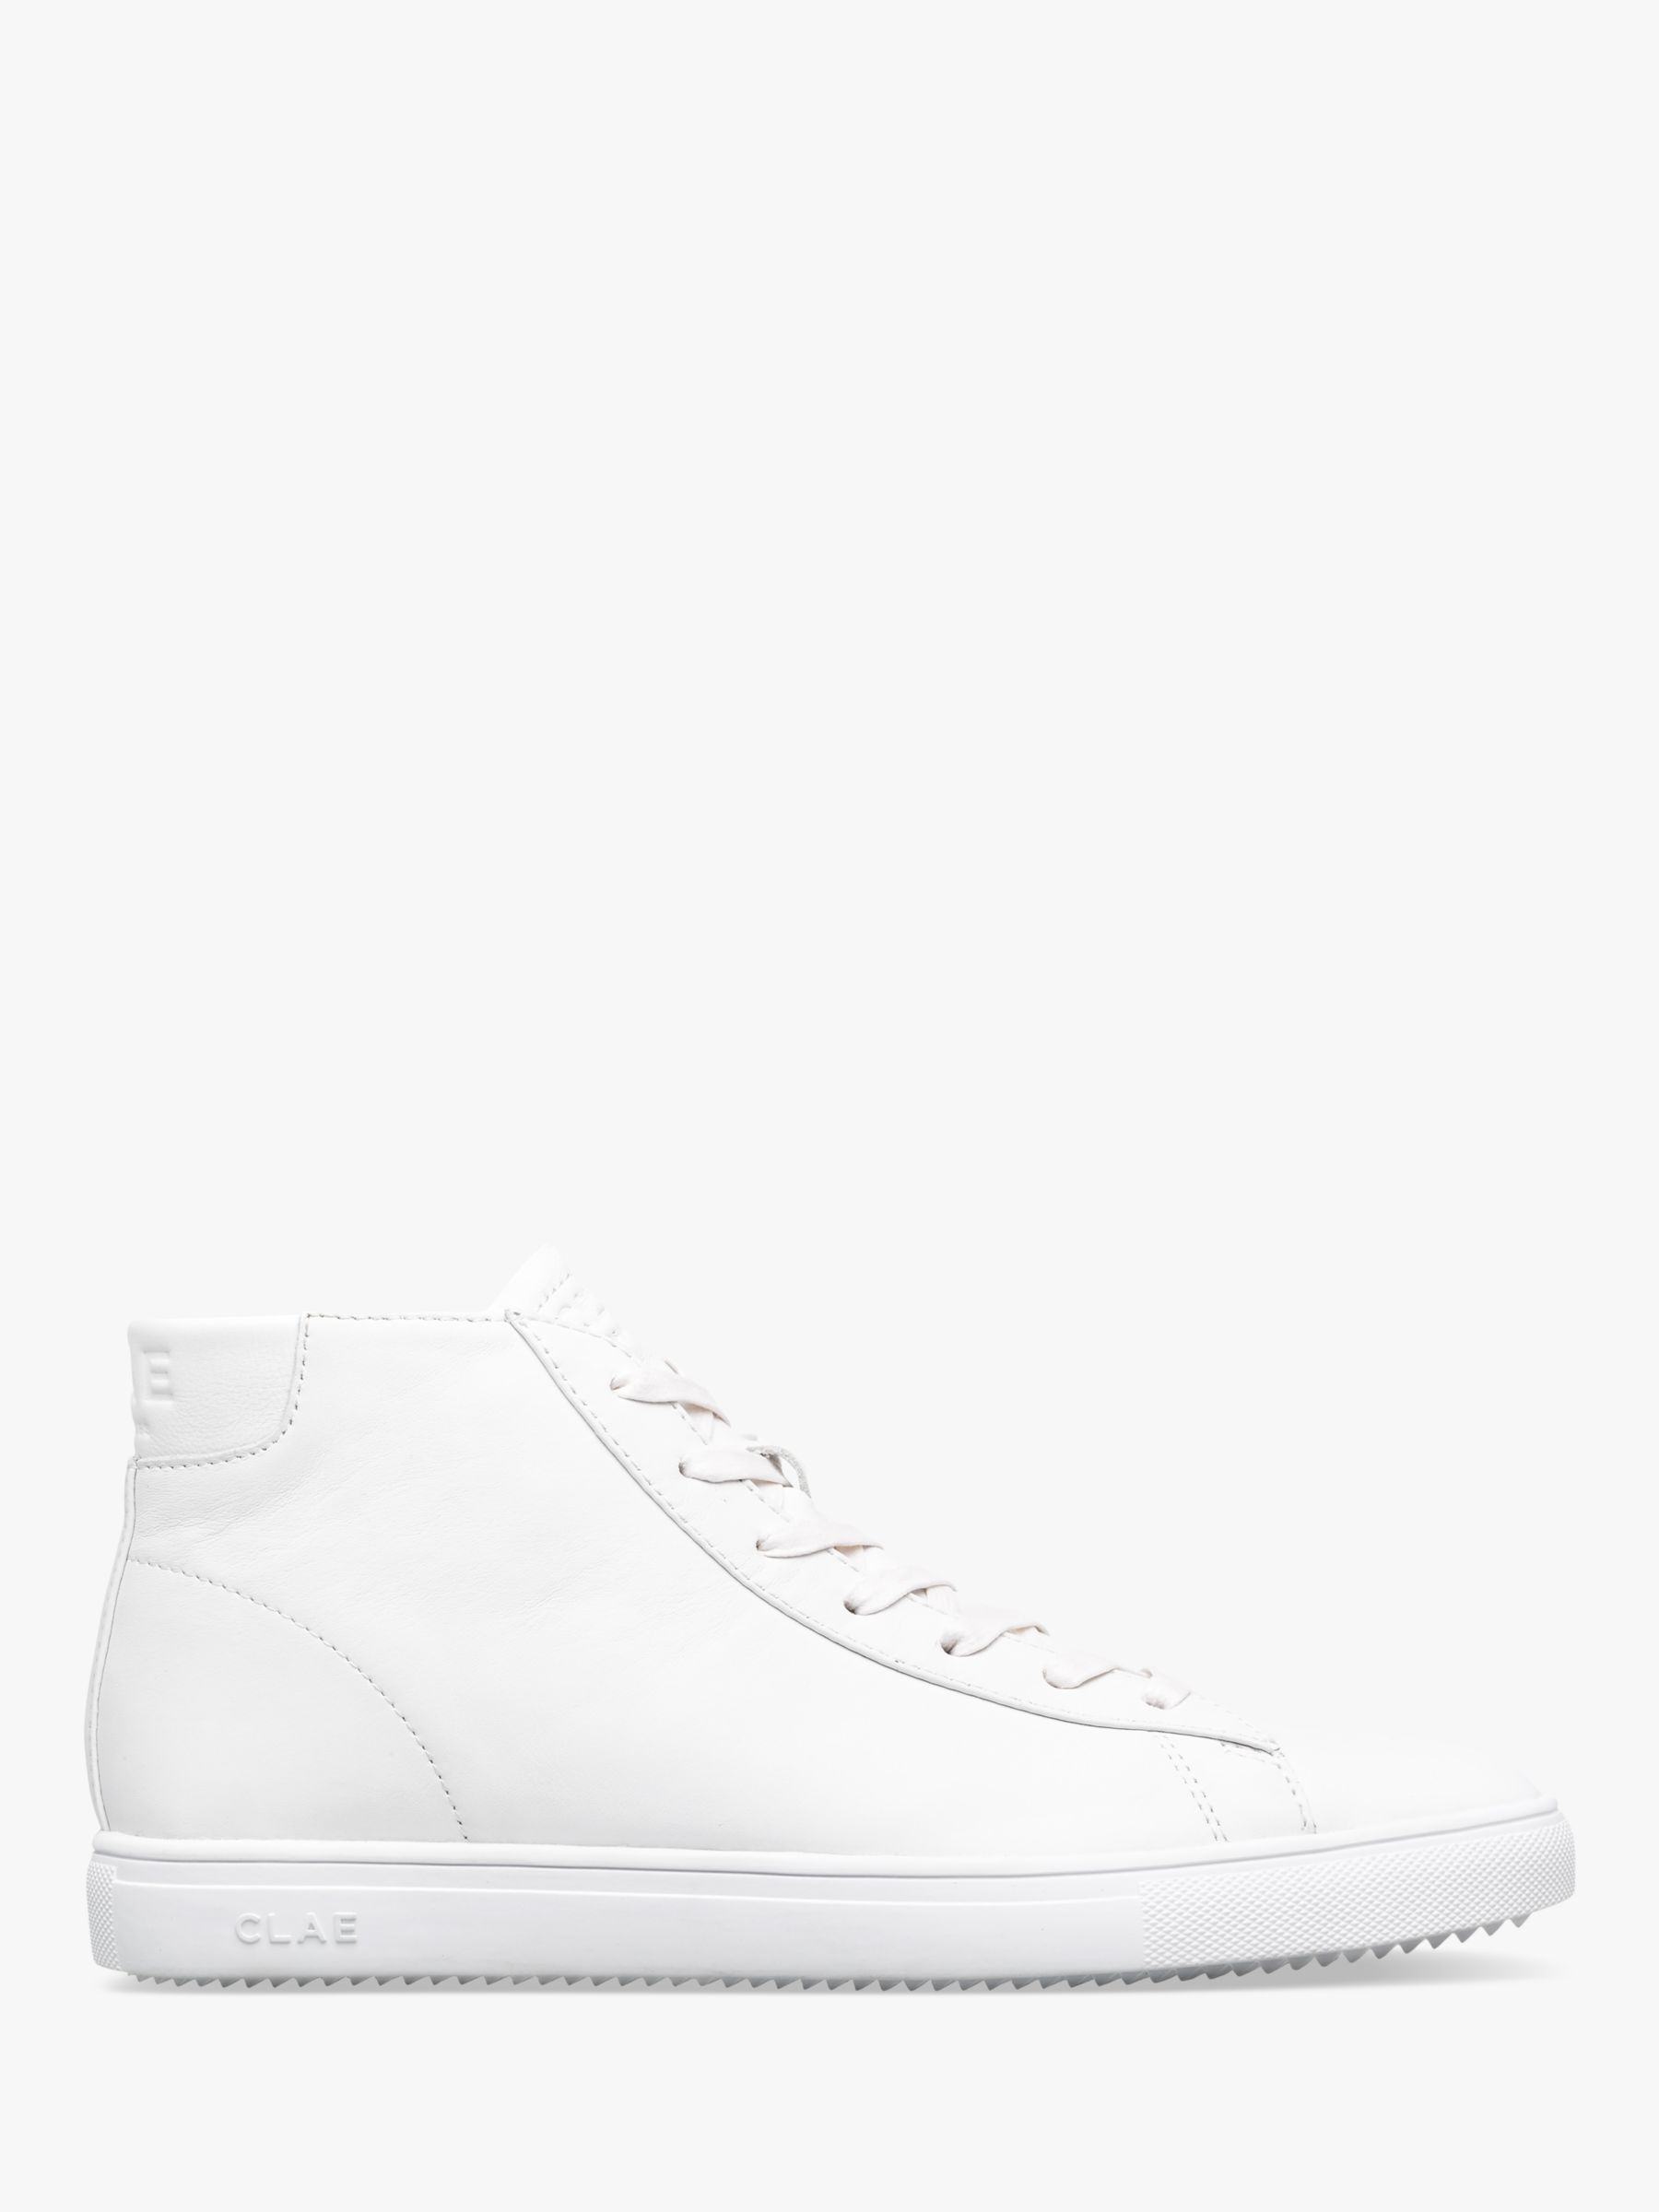 CLAE Bradley Mid-Top Leather Trainers, White, 7